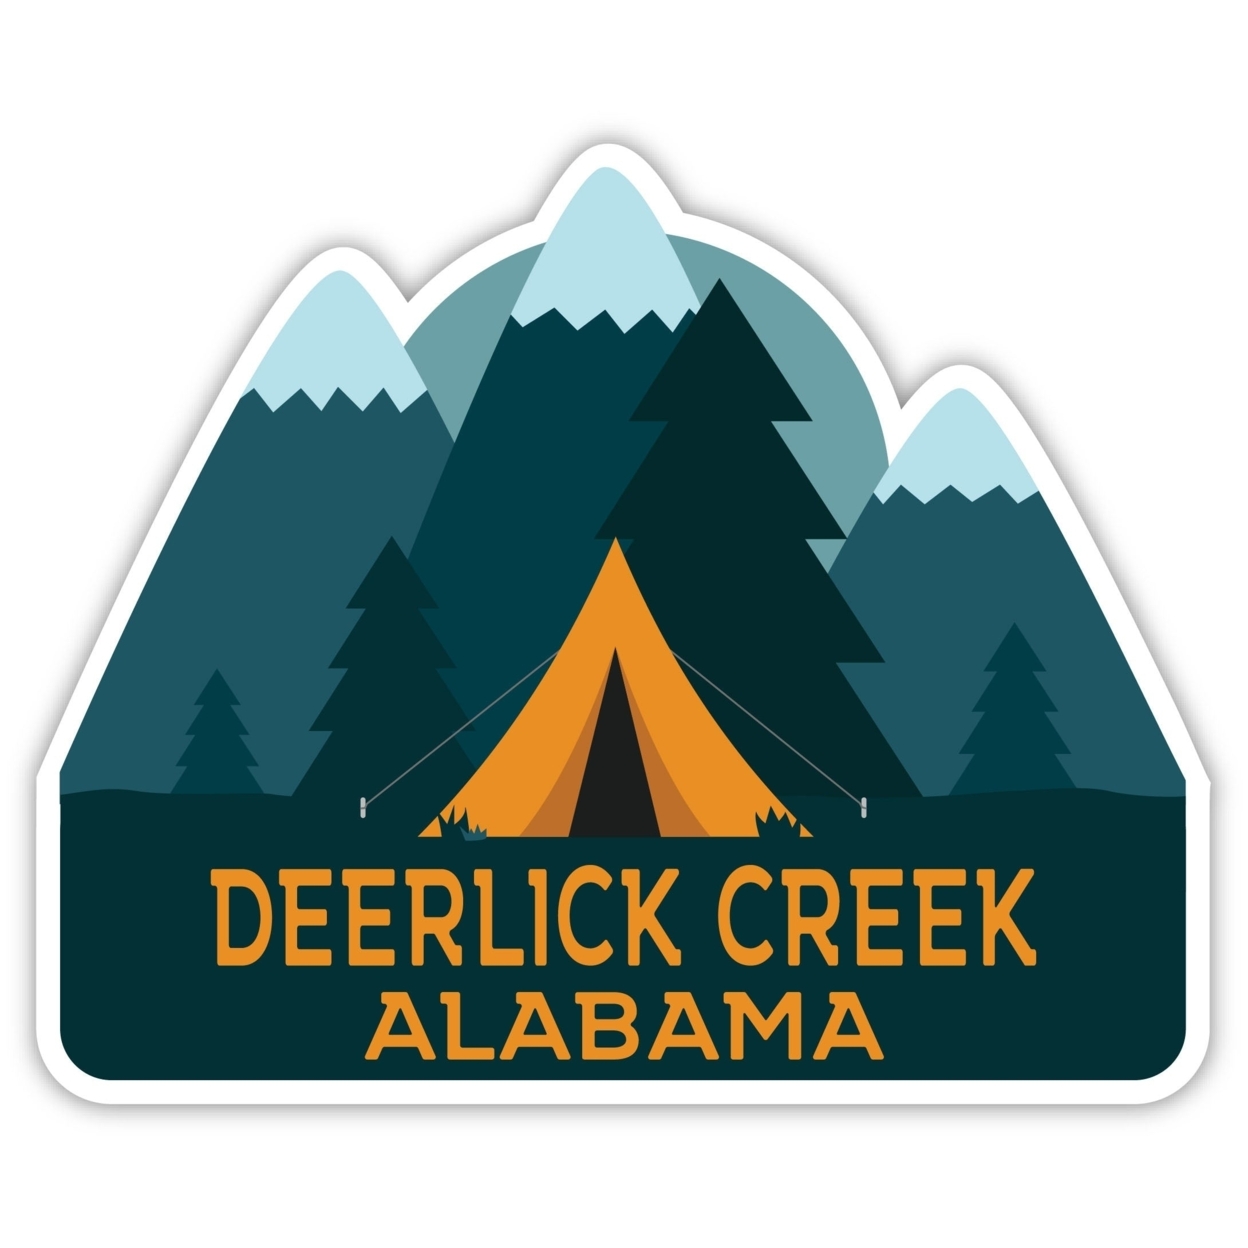 Deerlick Creek Alabama Souvenir Decorative Stickers (Choose Theme And Size) - Single Unit, 2-Inch, Great Outdoors